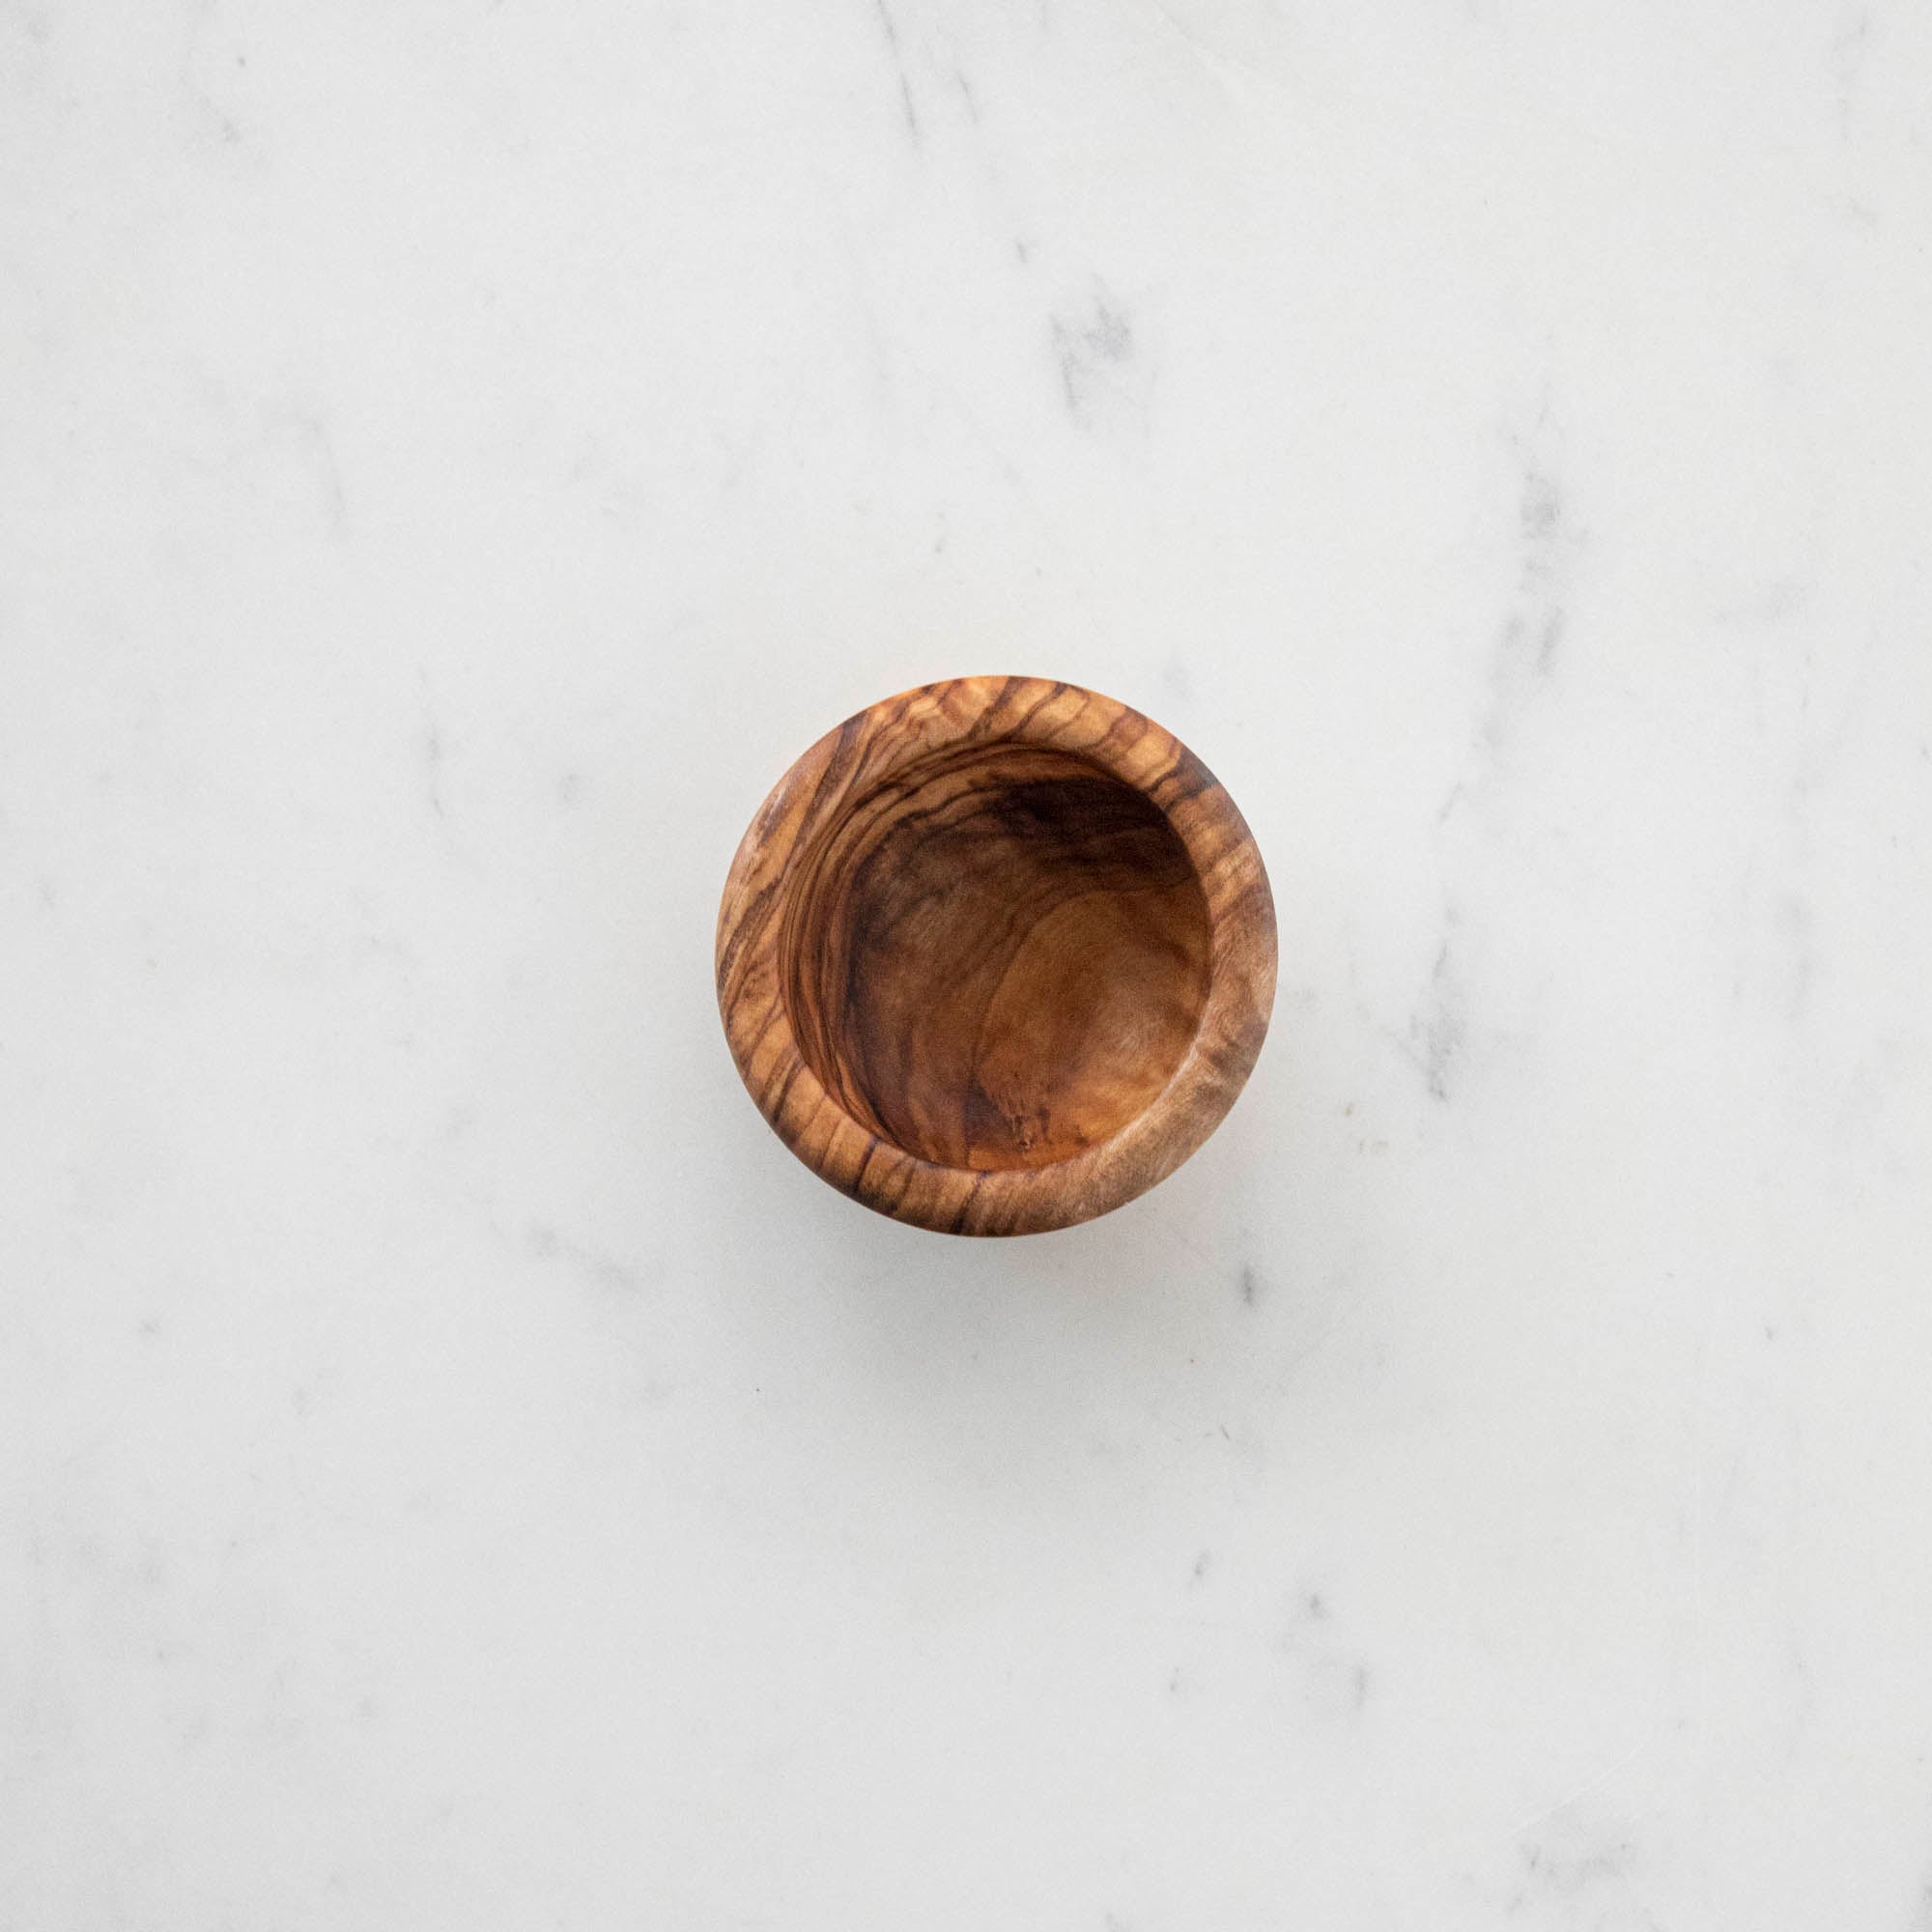 Three Natural Olivewood Pinch Bowls with salt and a sprig of rosemary on a kitchen counter.